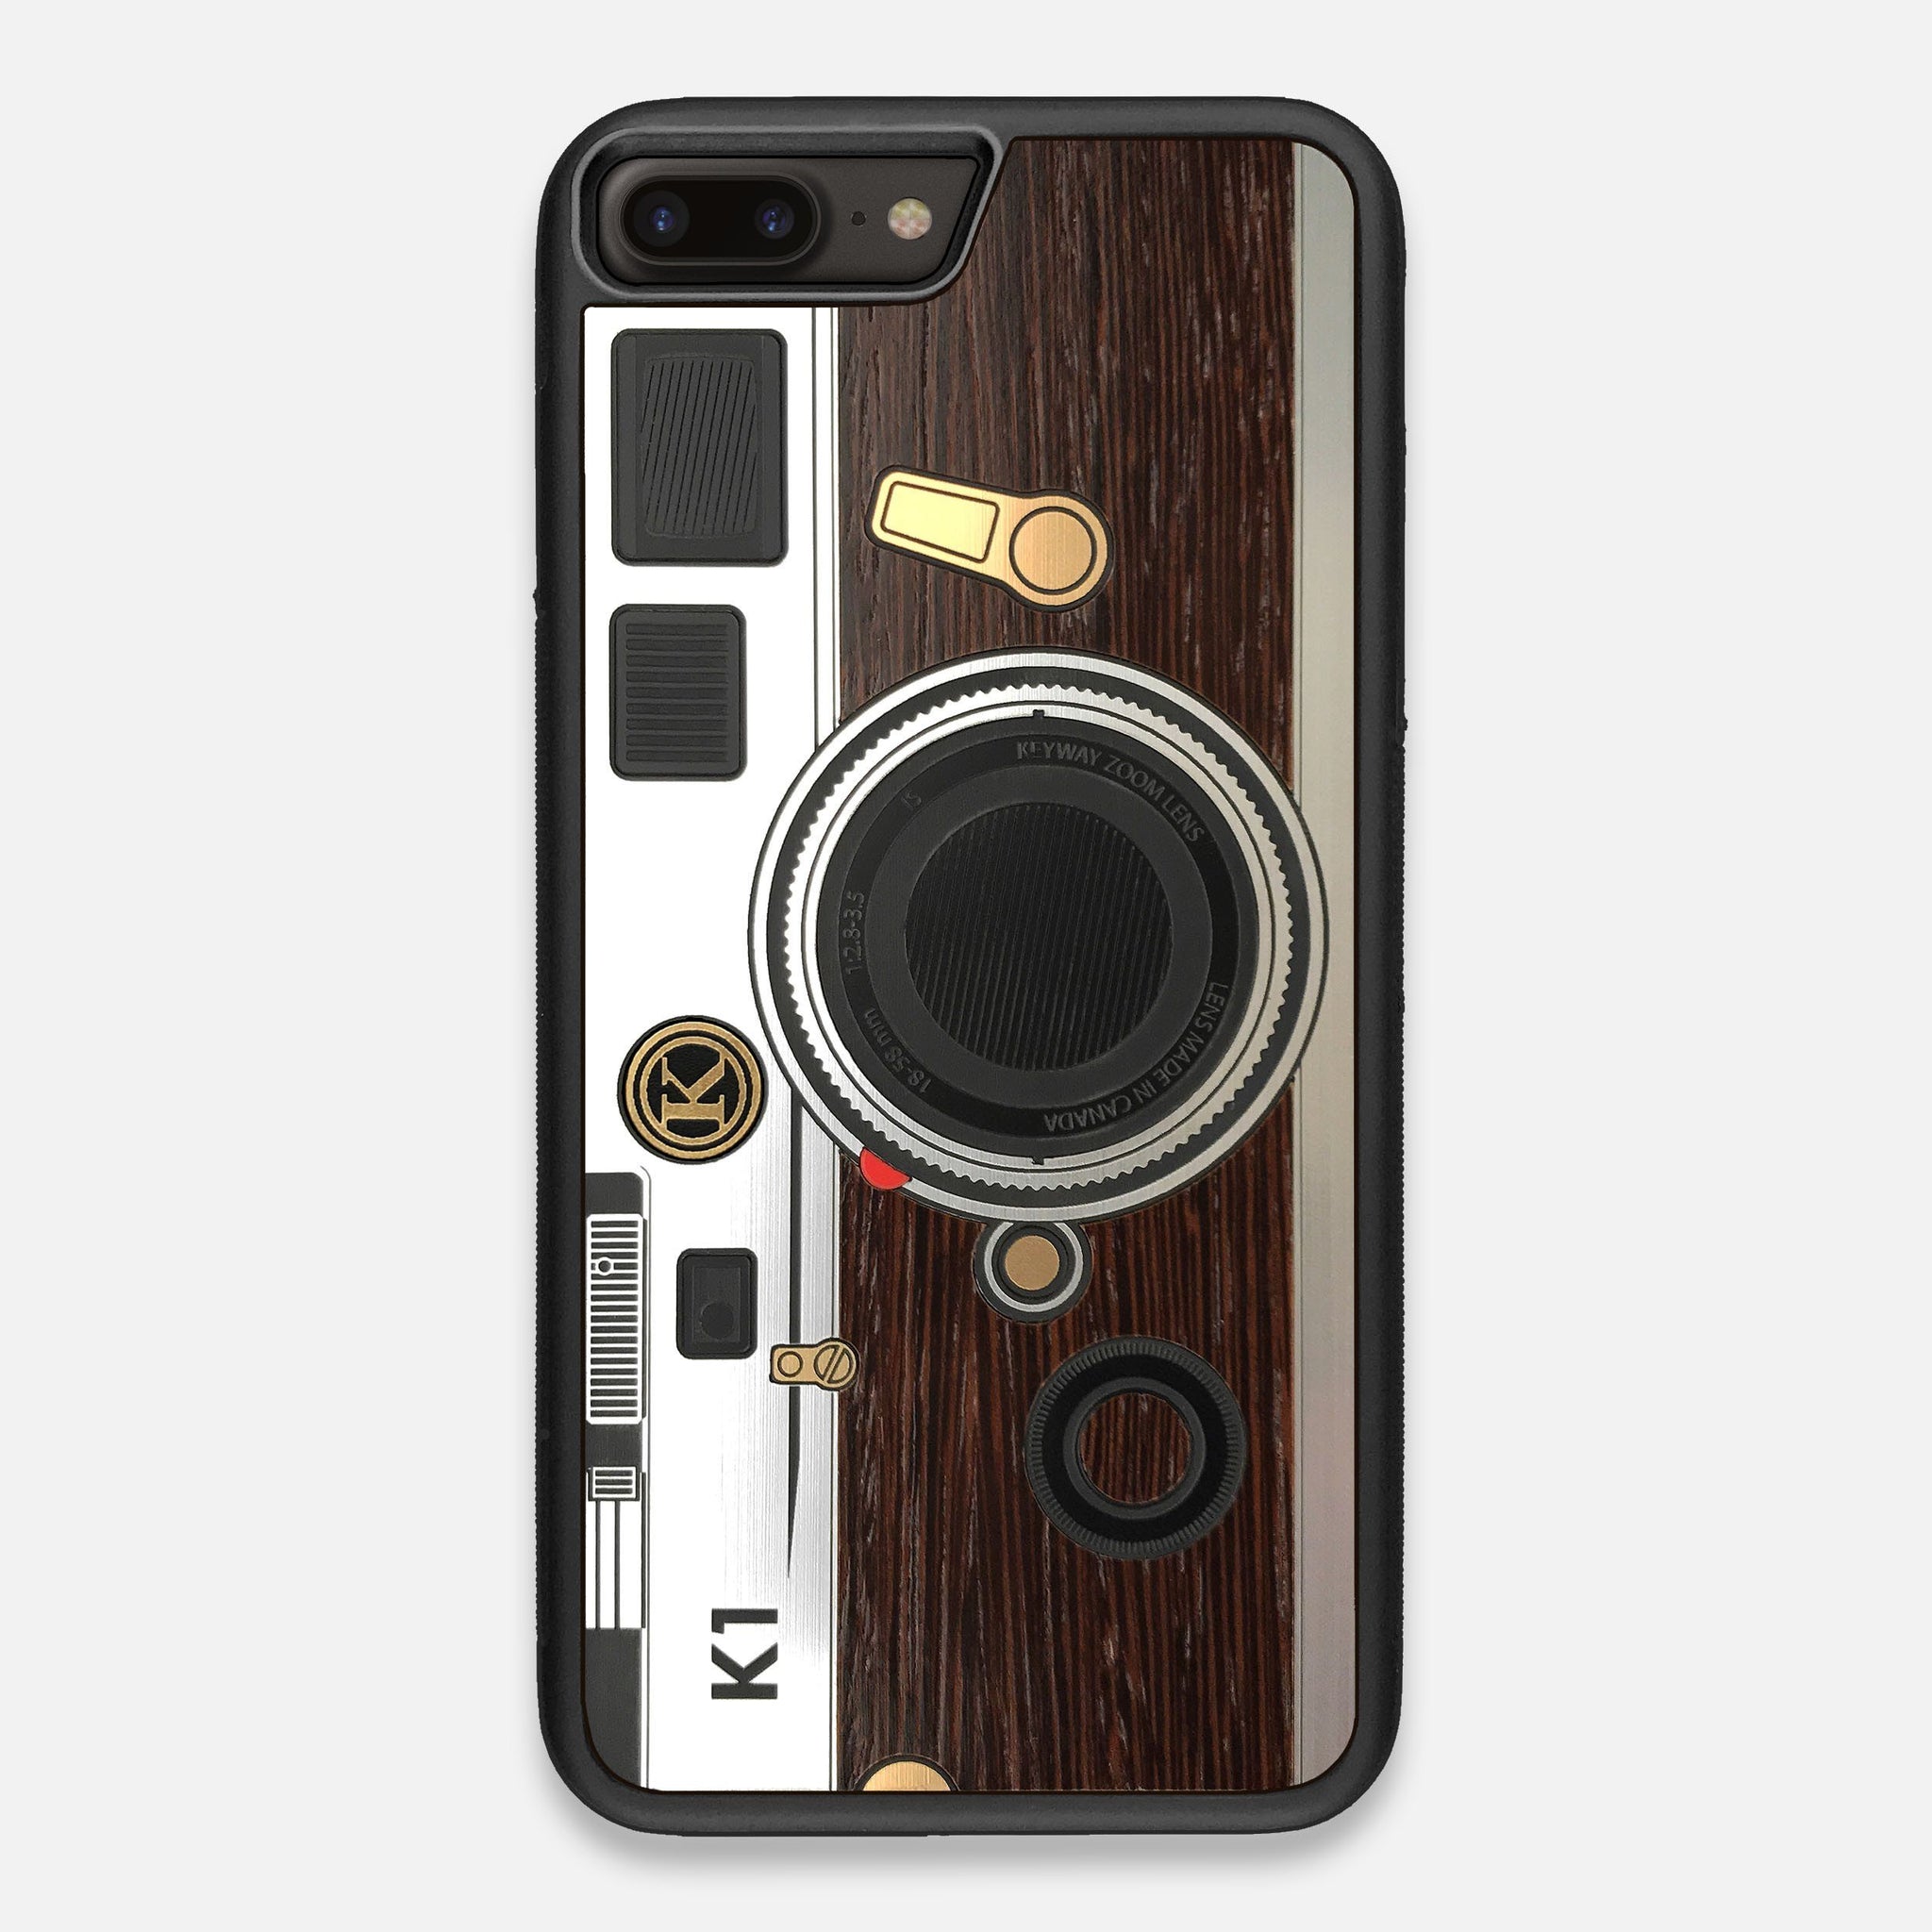 Front view of the classic Camera, silver metallic and wood iPhone 7/8 Plus Case by Keyway Designs